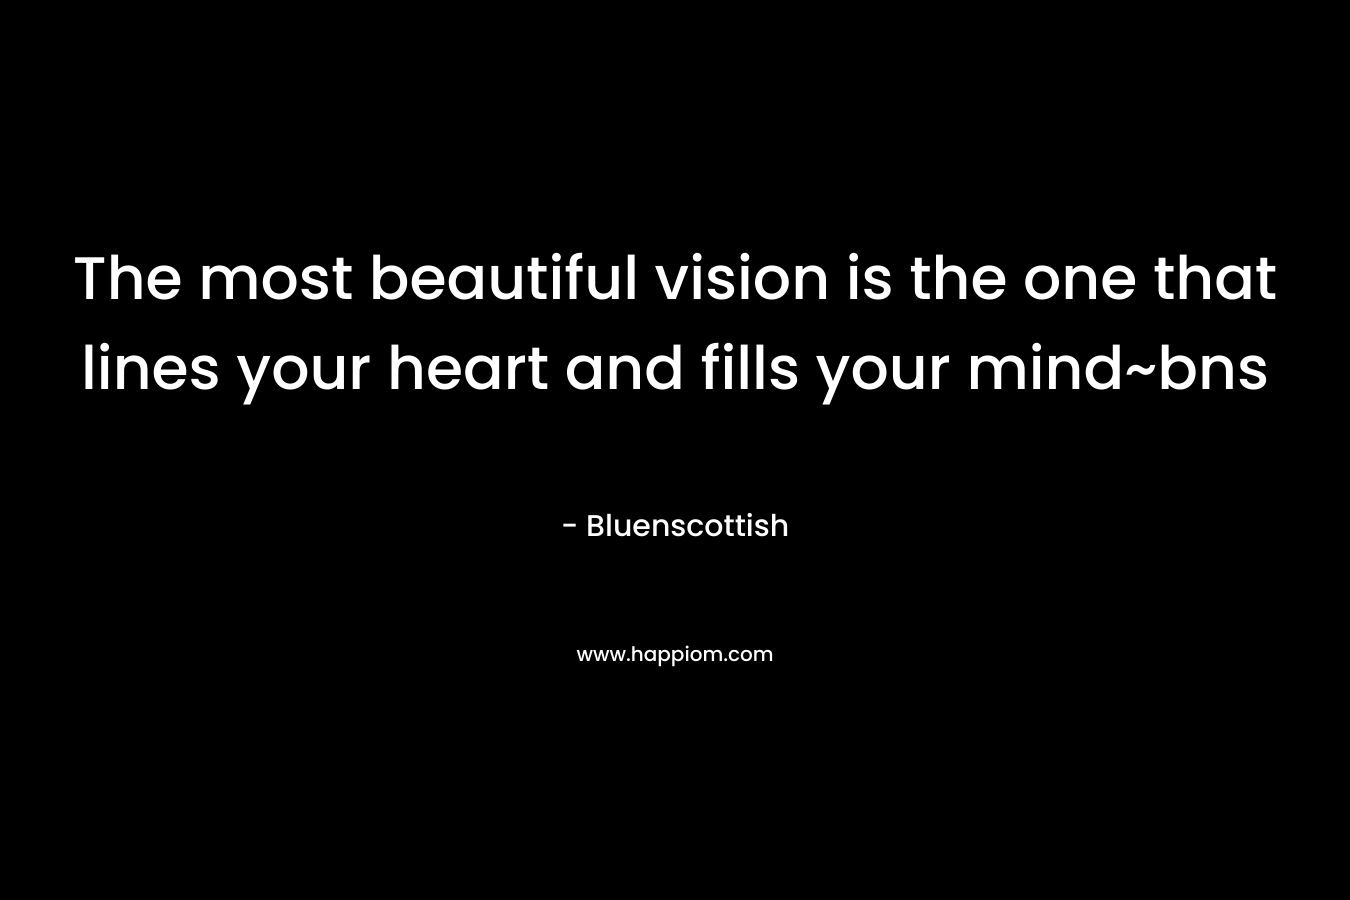 The most beautiful vision is the one that lines your heart and fills your mind~bns